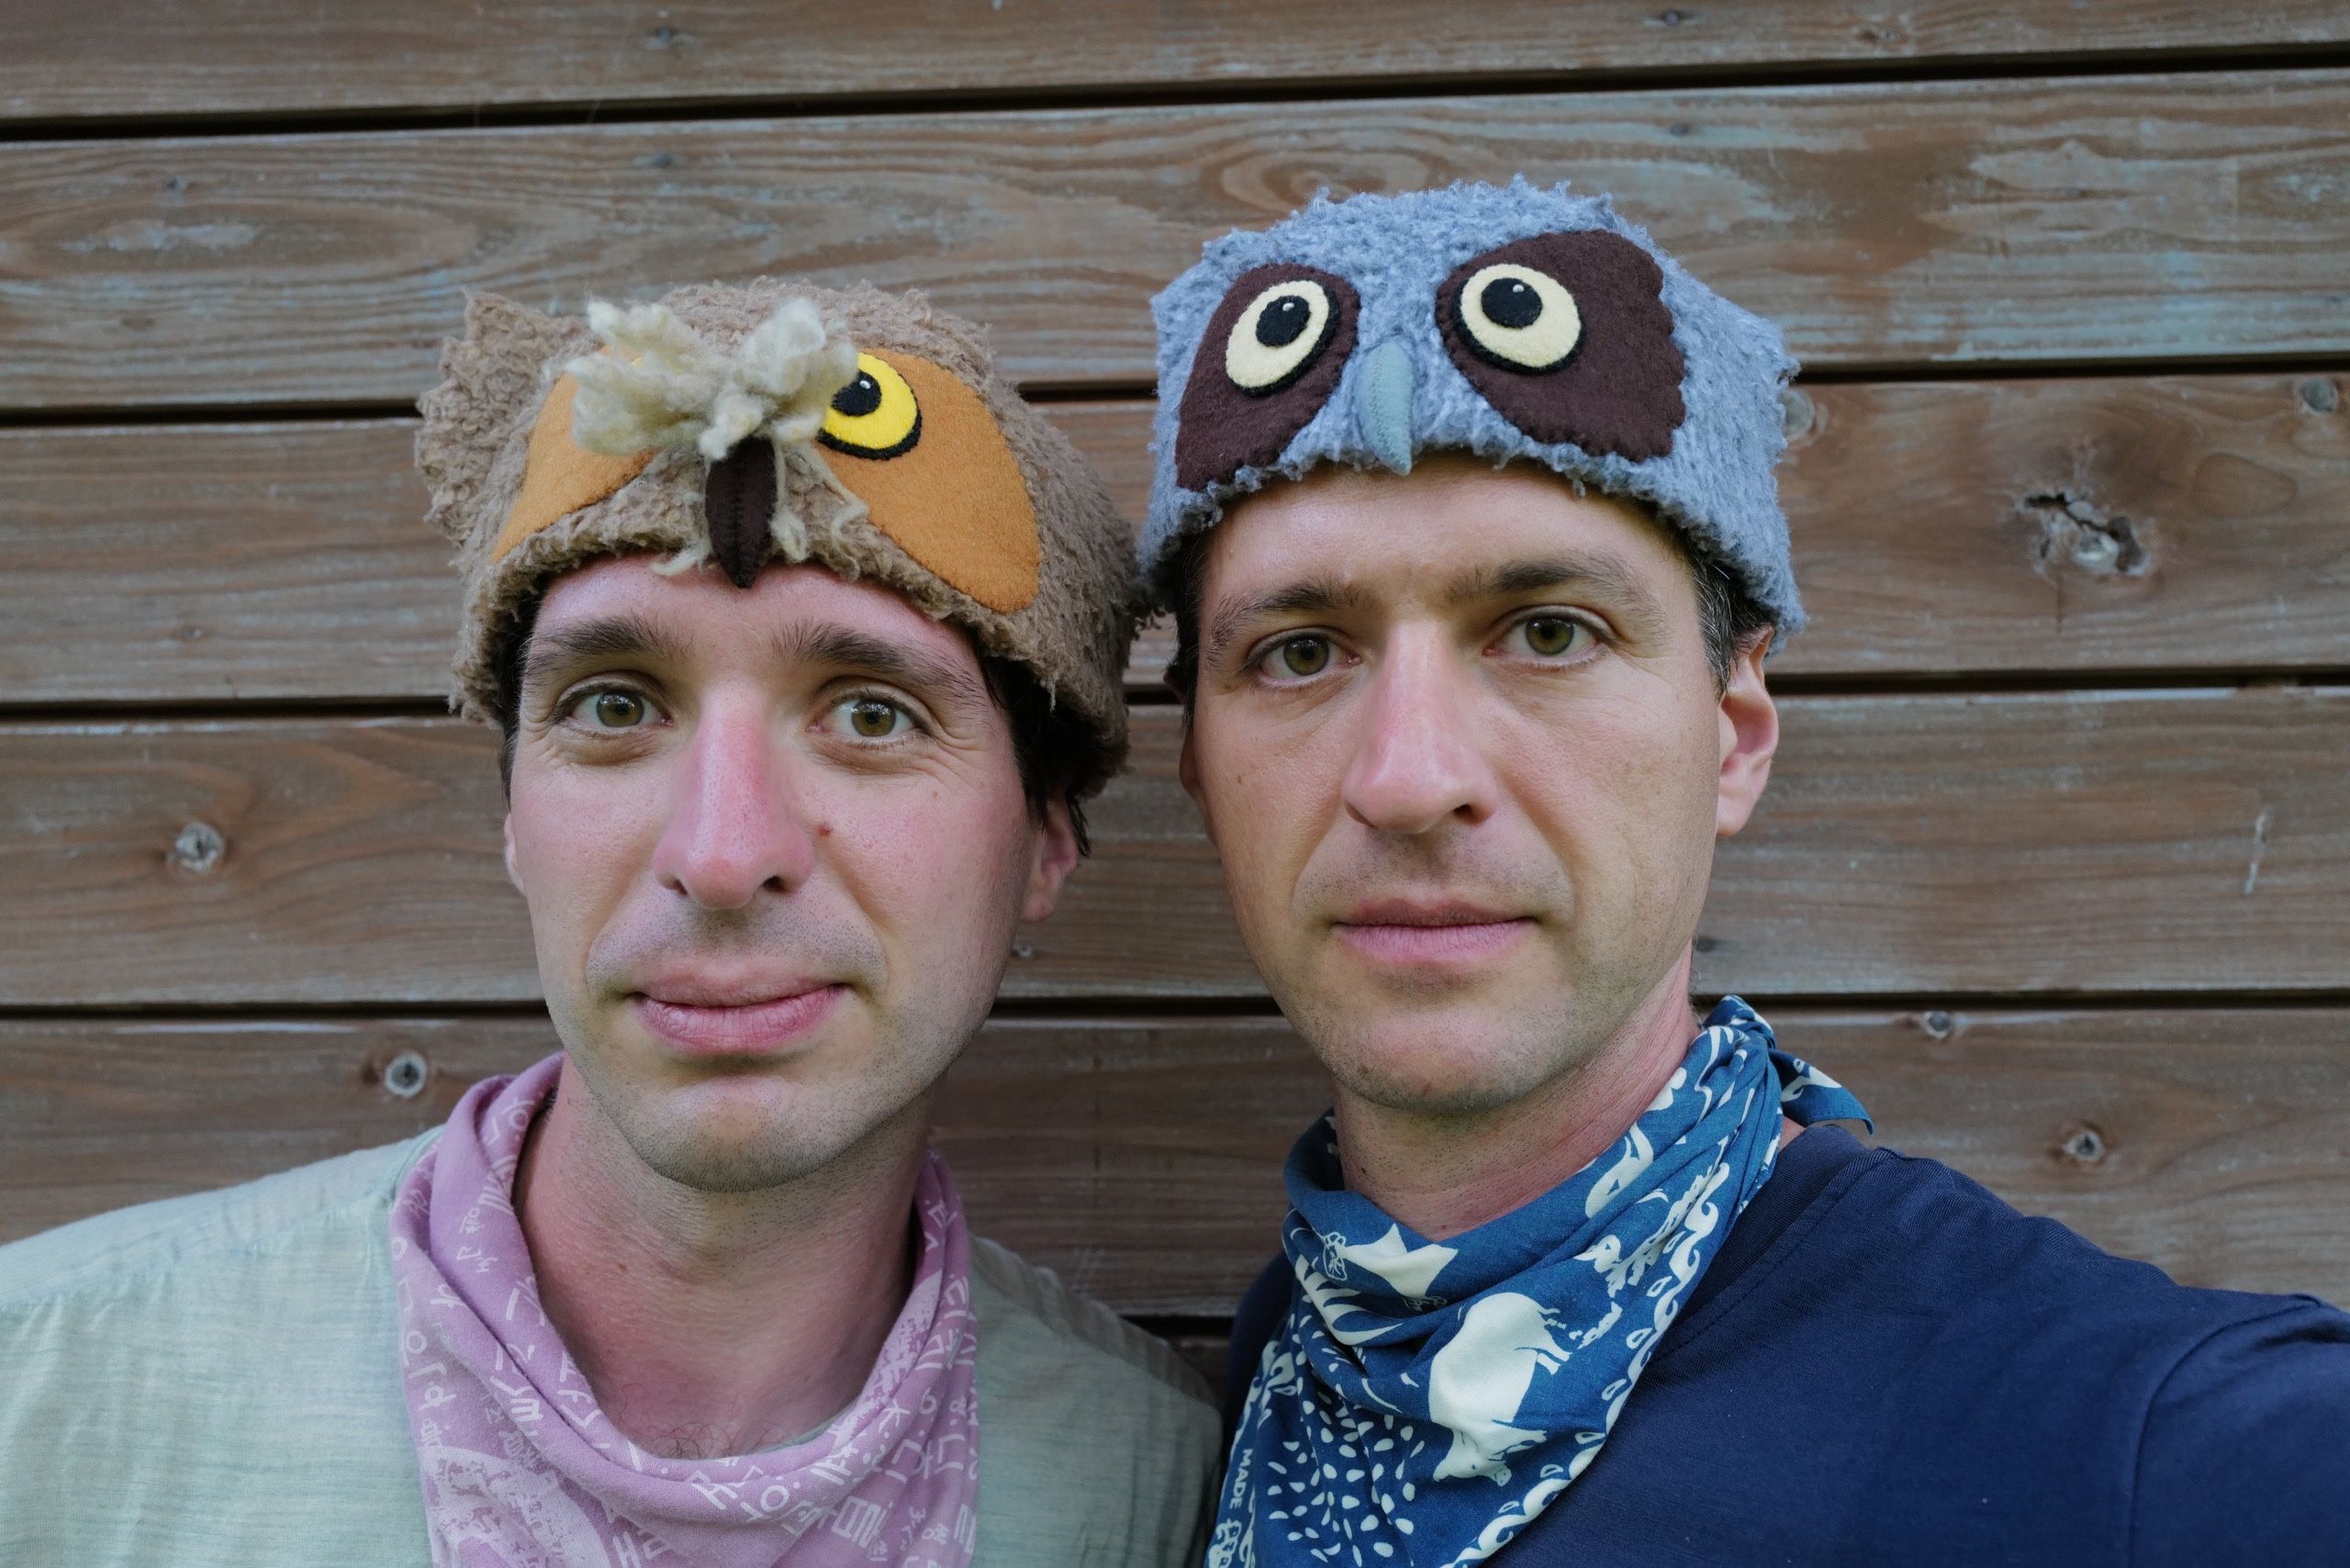 Gabor and Peter Orosz, wearing owl hats, look into the camera